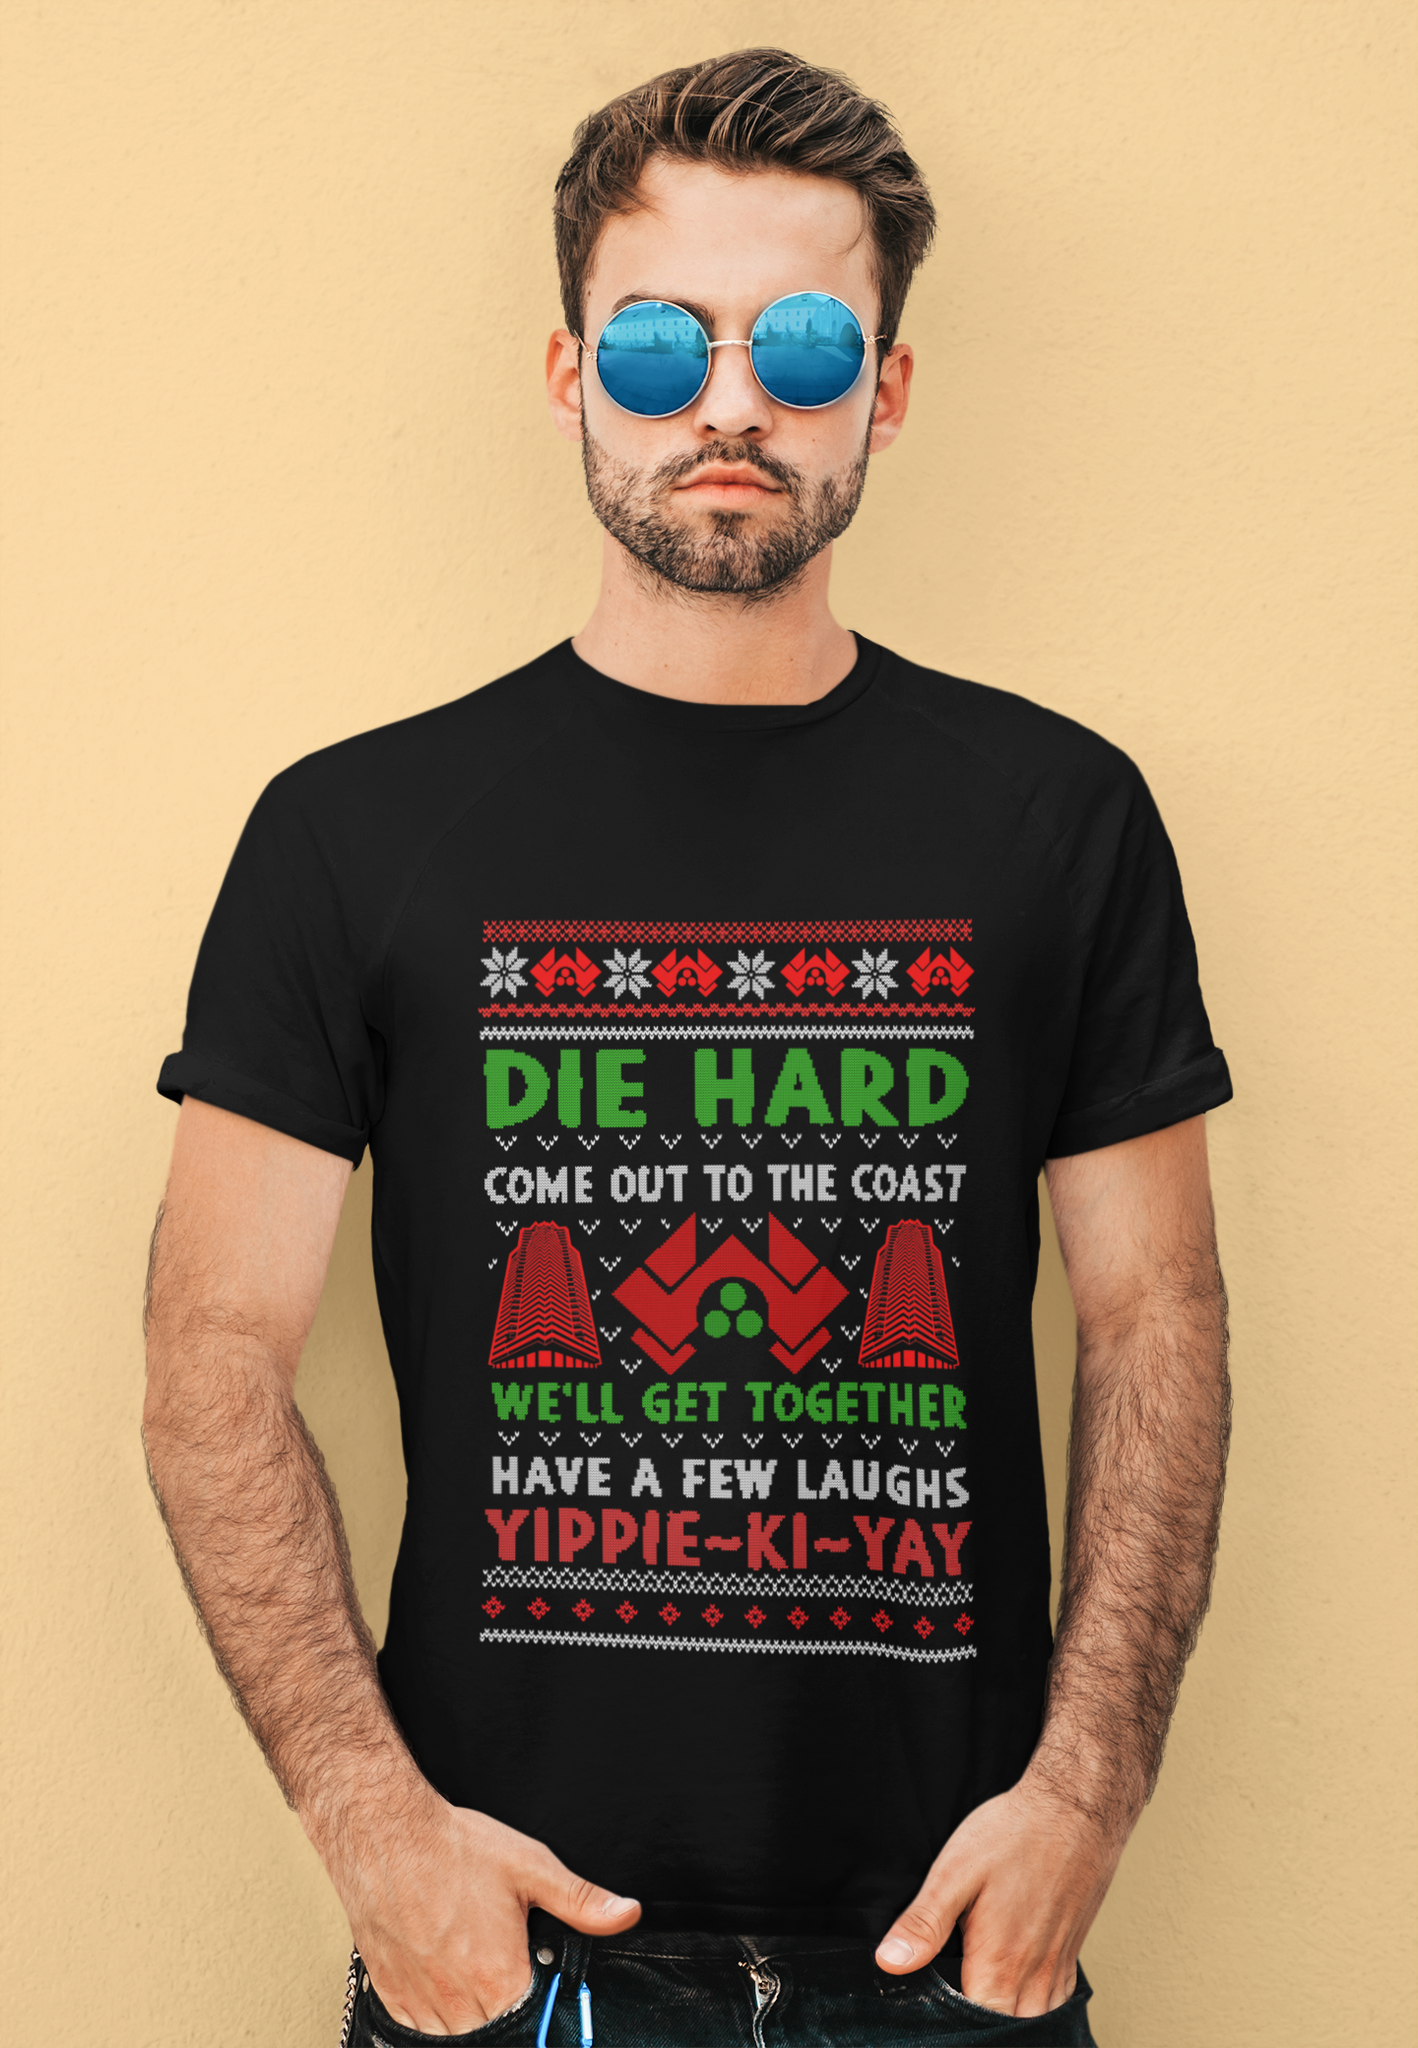 Die Hard Ugly Sweater Shirt, John McClane T Shirt, Come Out To The Coast Tshirt, Christmas Gifts